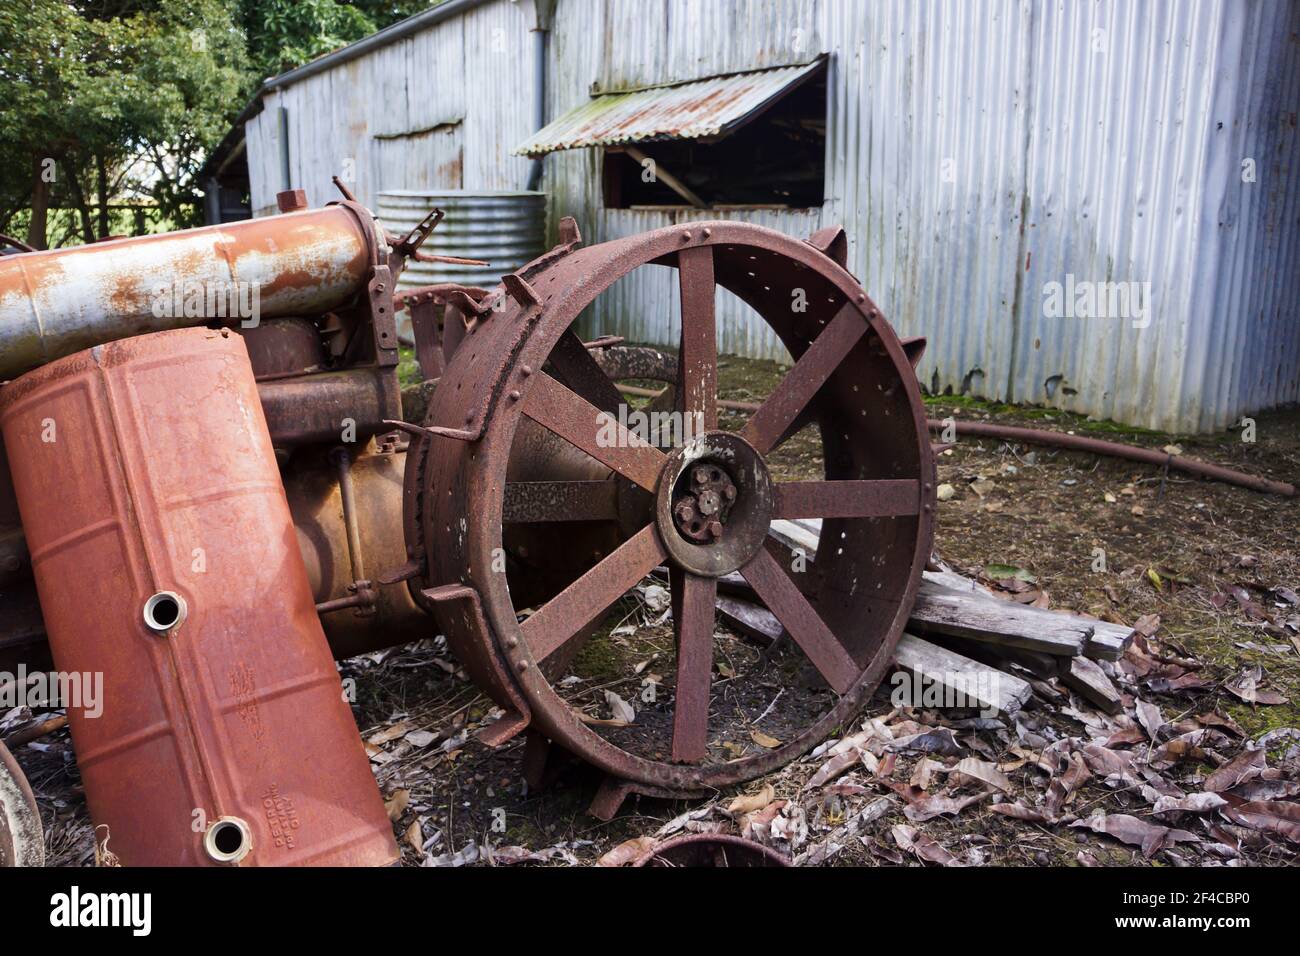 Early farm machinery discarded behind a corrugated iron shed with parts of an old tractor and fuel tank used by early settlers. Stock Photo